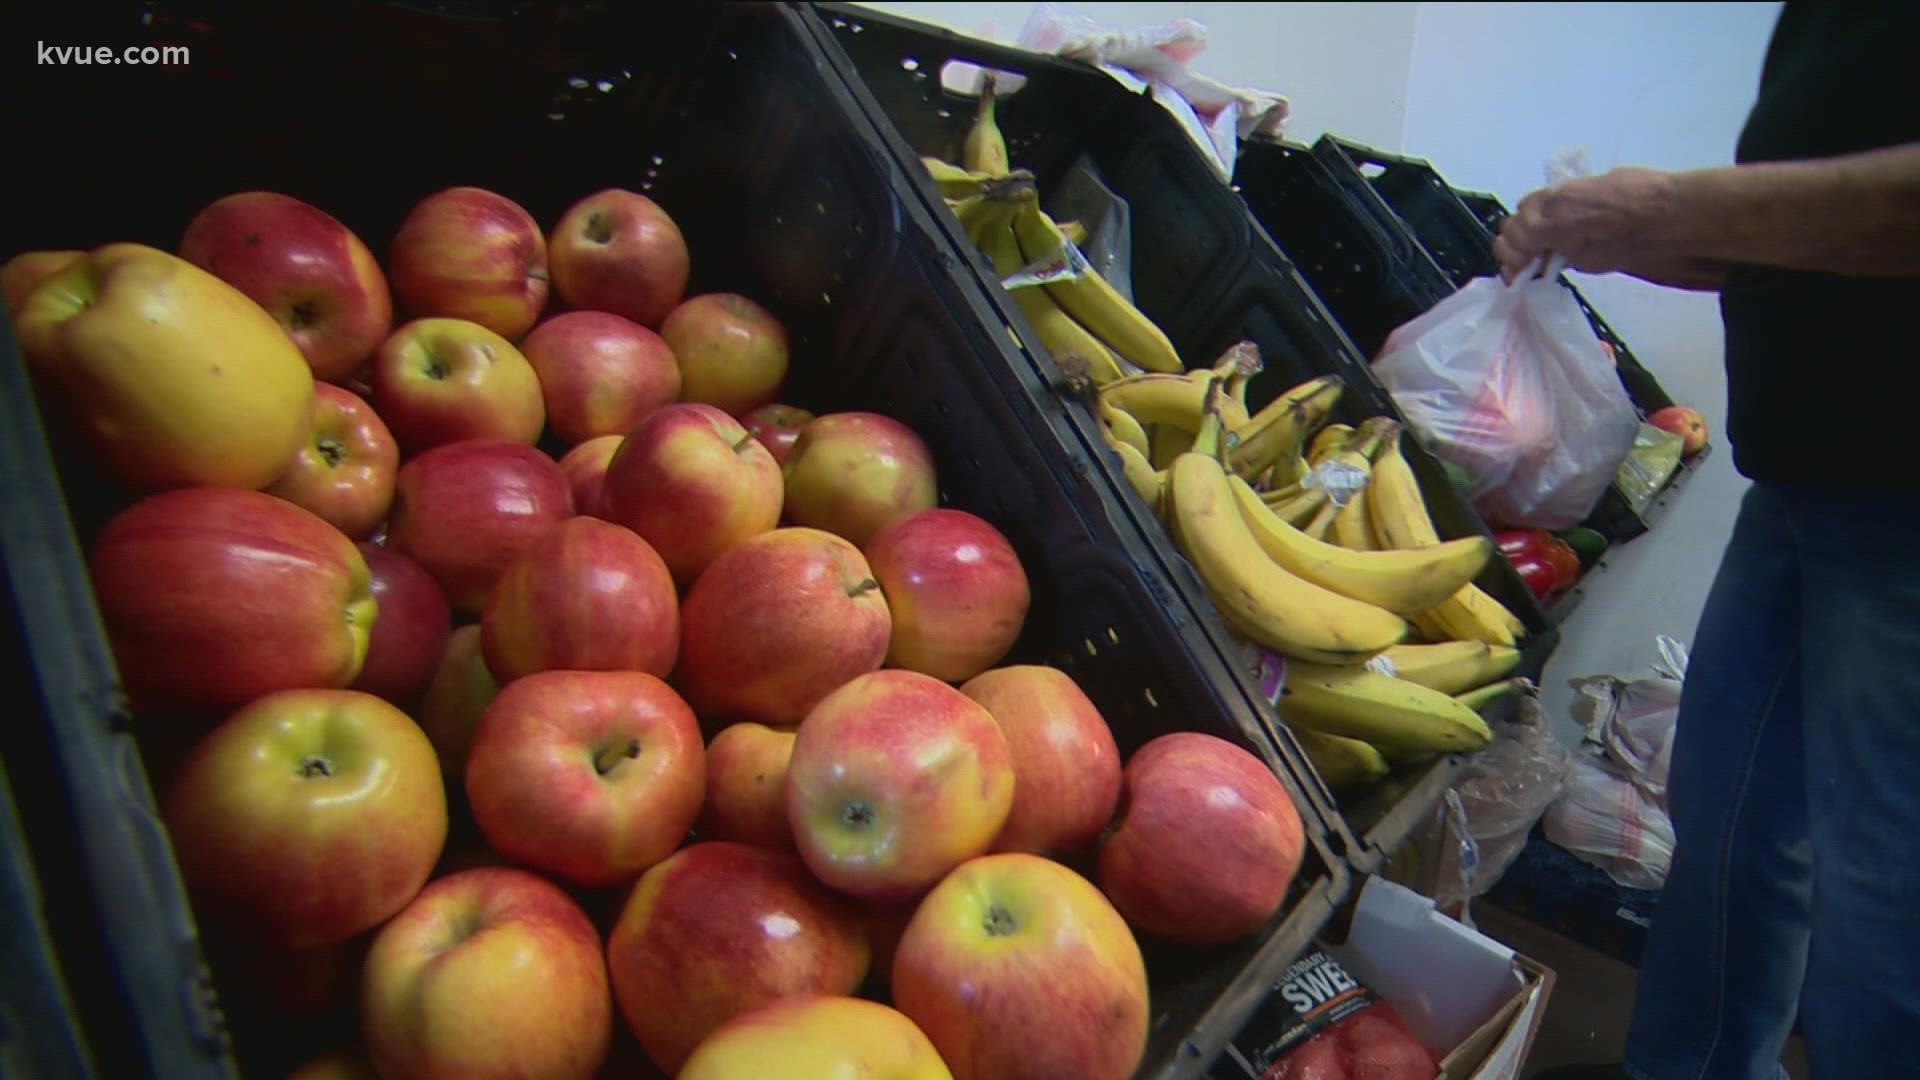 A food pantry in Central Texas is helping food-insecure families put fresh produce on the table.